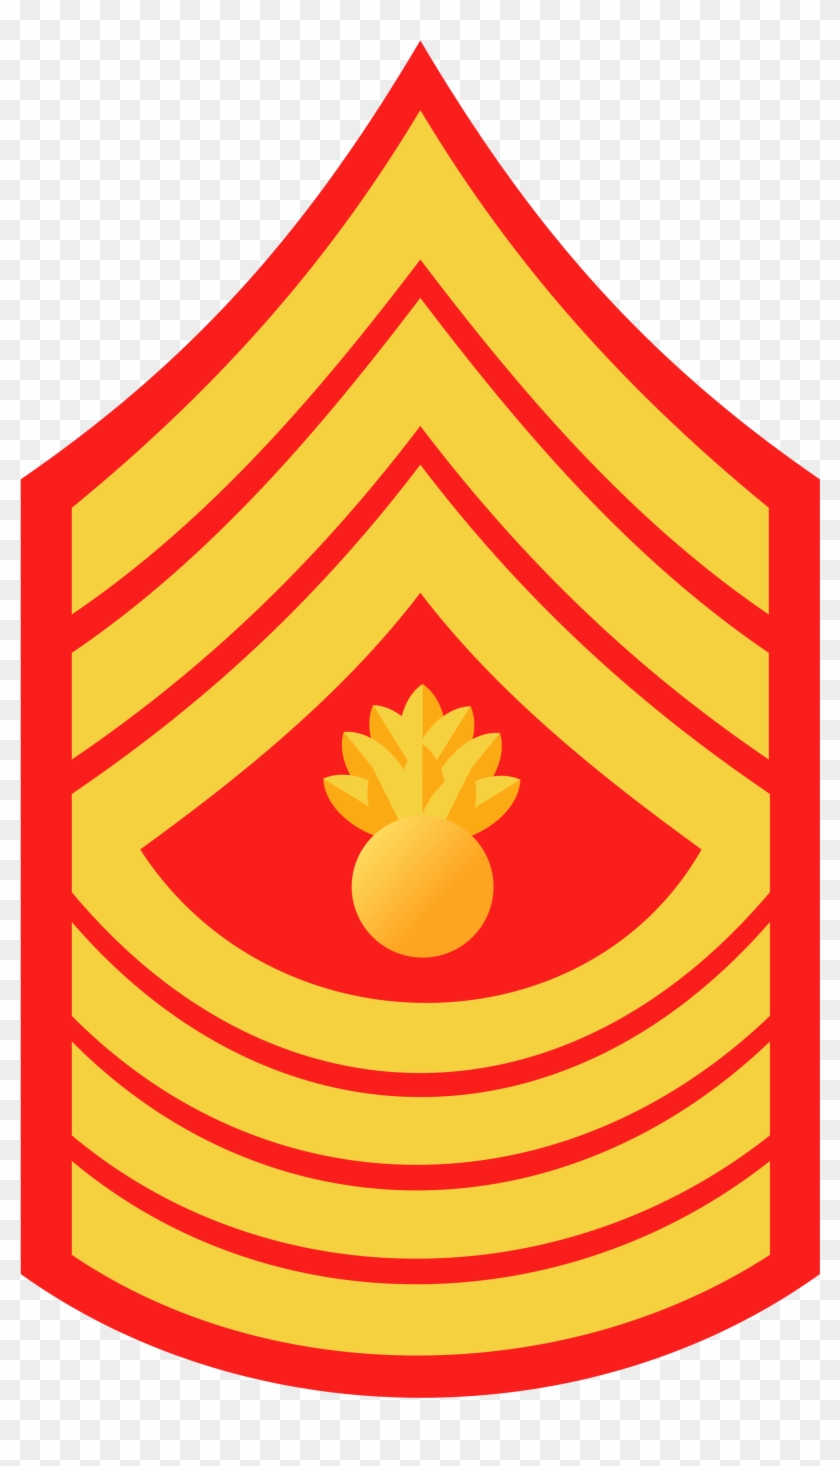 Master Guns Sergeant Major Of The Marine Corps Rank Hd Png Download